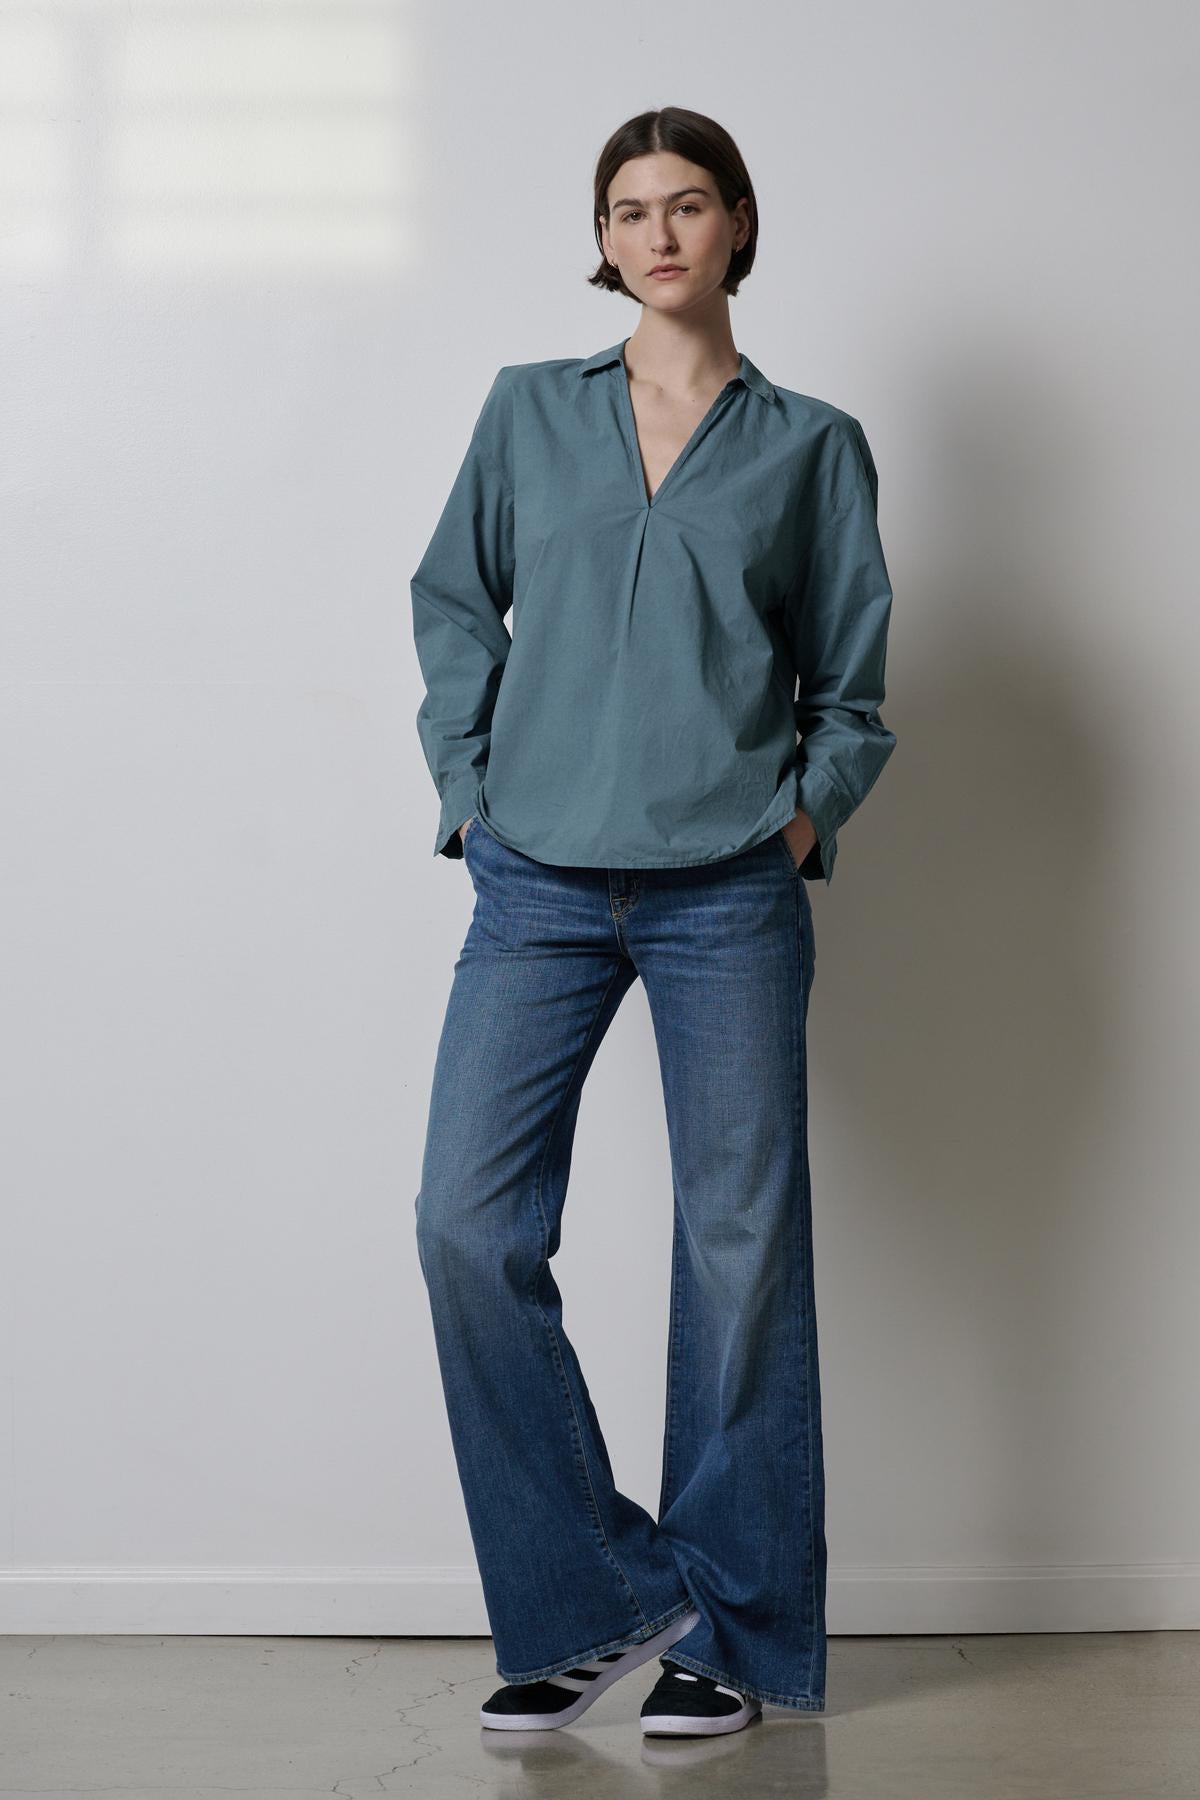   A woman wearing blue jeans and a Velvet by Jenny Graham BREA SHIRT full length 